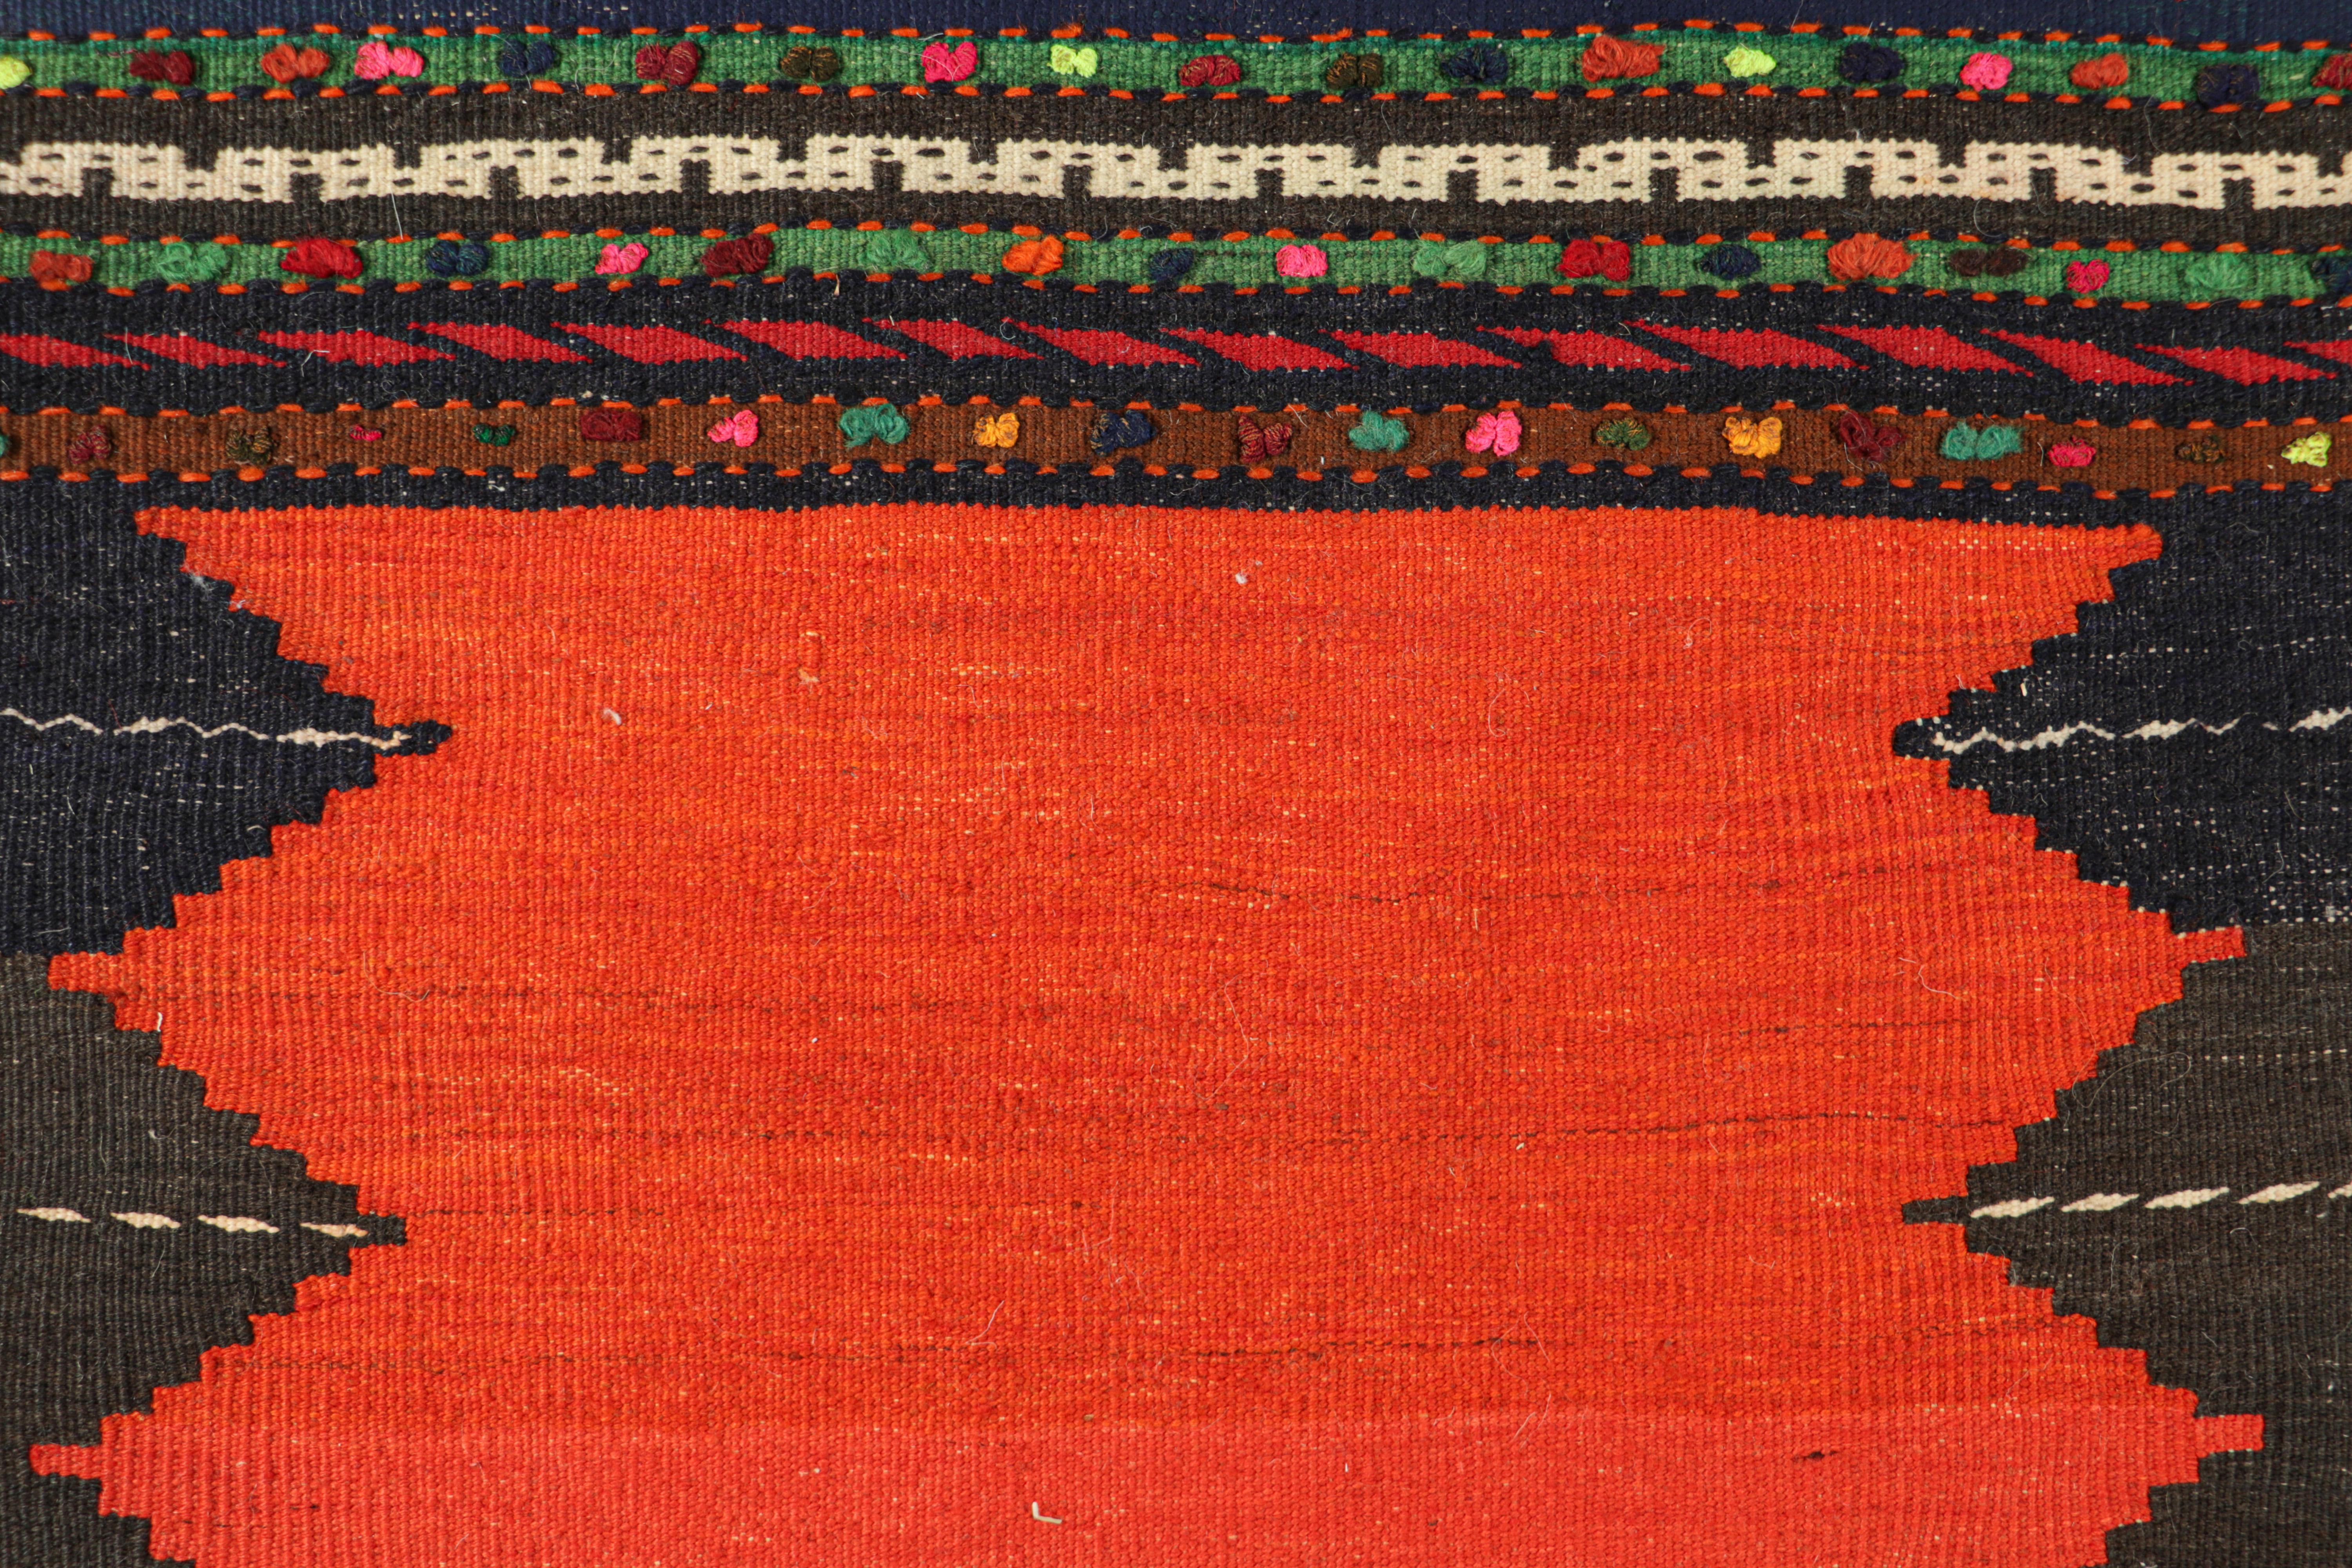 Handwoven in wool, circa 1950-1960, this 2×4 vintage Afghan tribal kilim is a collectible tribal piece that may have been used as table covers in nomadic daily life, much similar to Persian Sofreh Kilims.

On the Design: 

Drawing on Afghan tribal